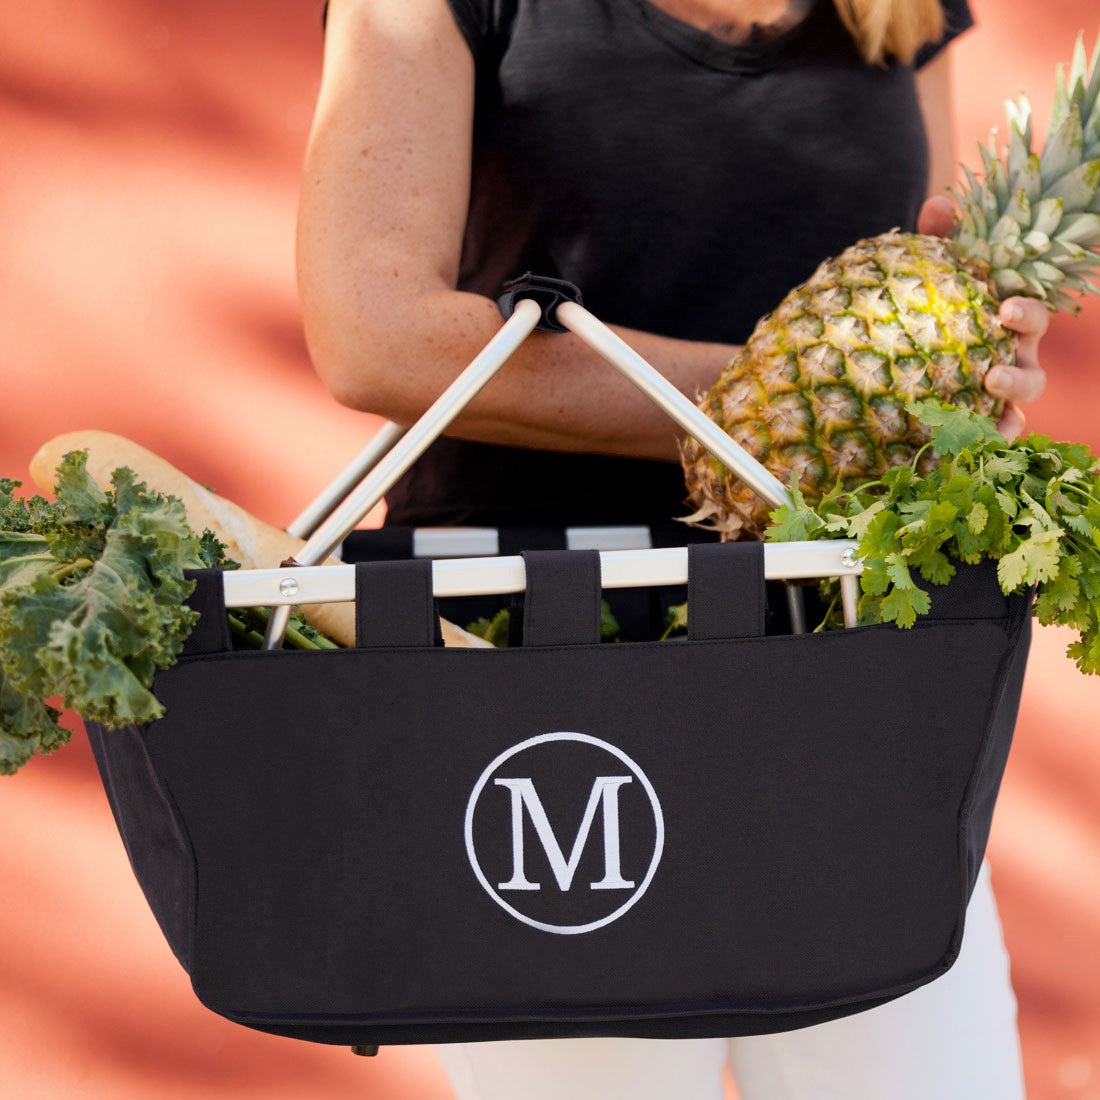 Black Market Tote - Great for shopping!